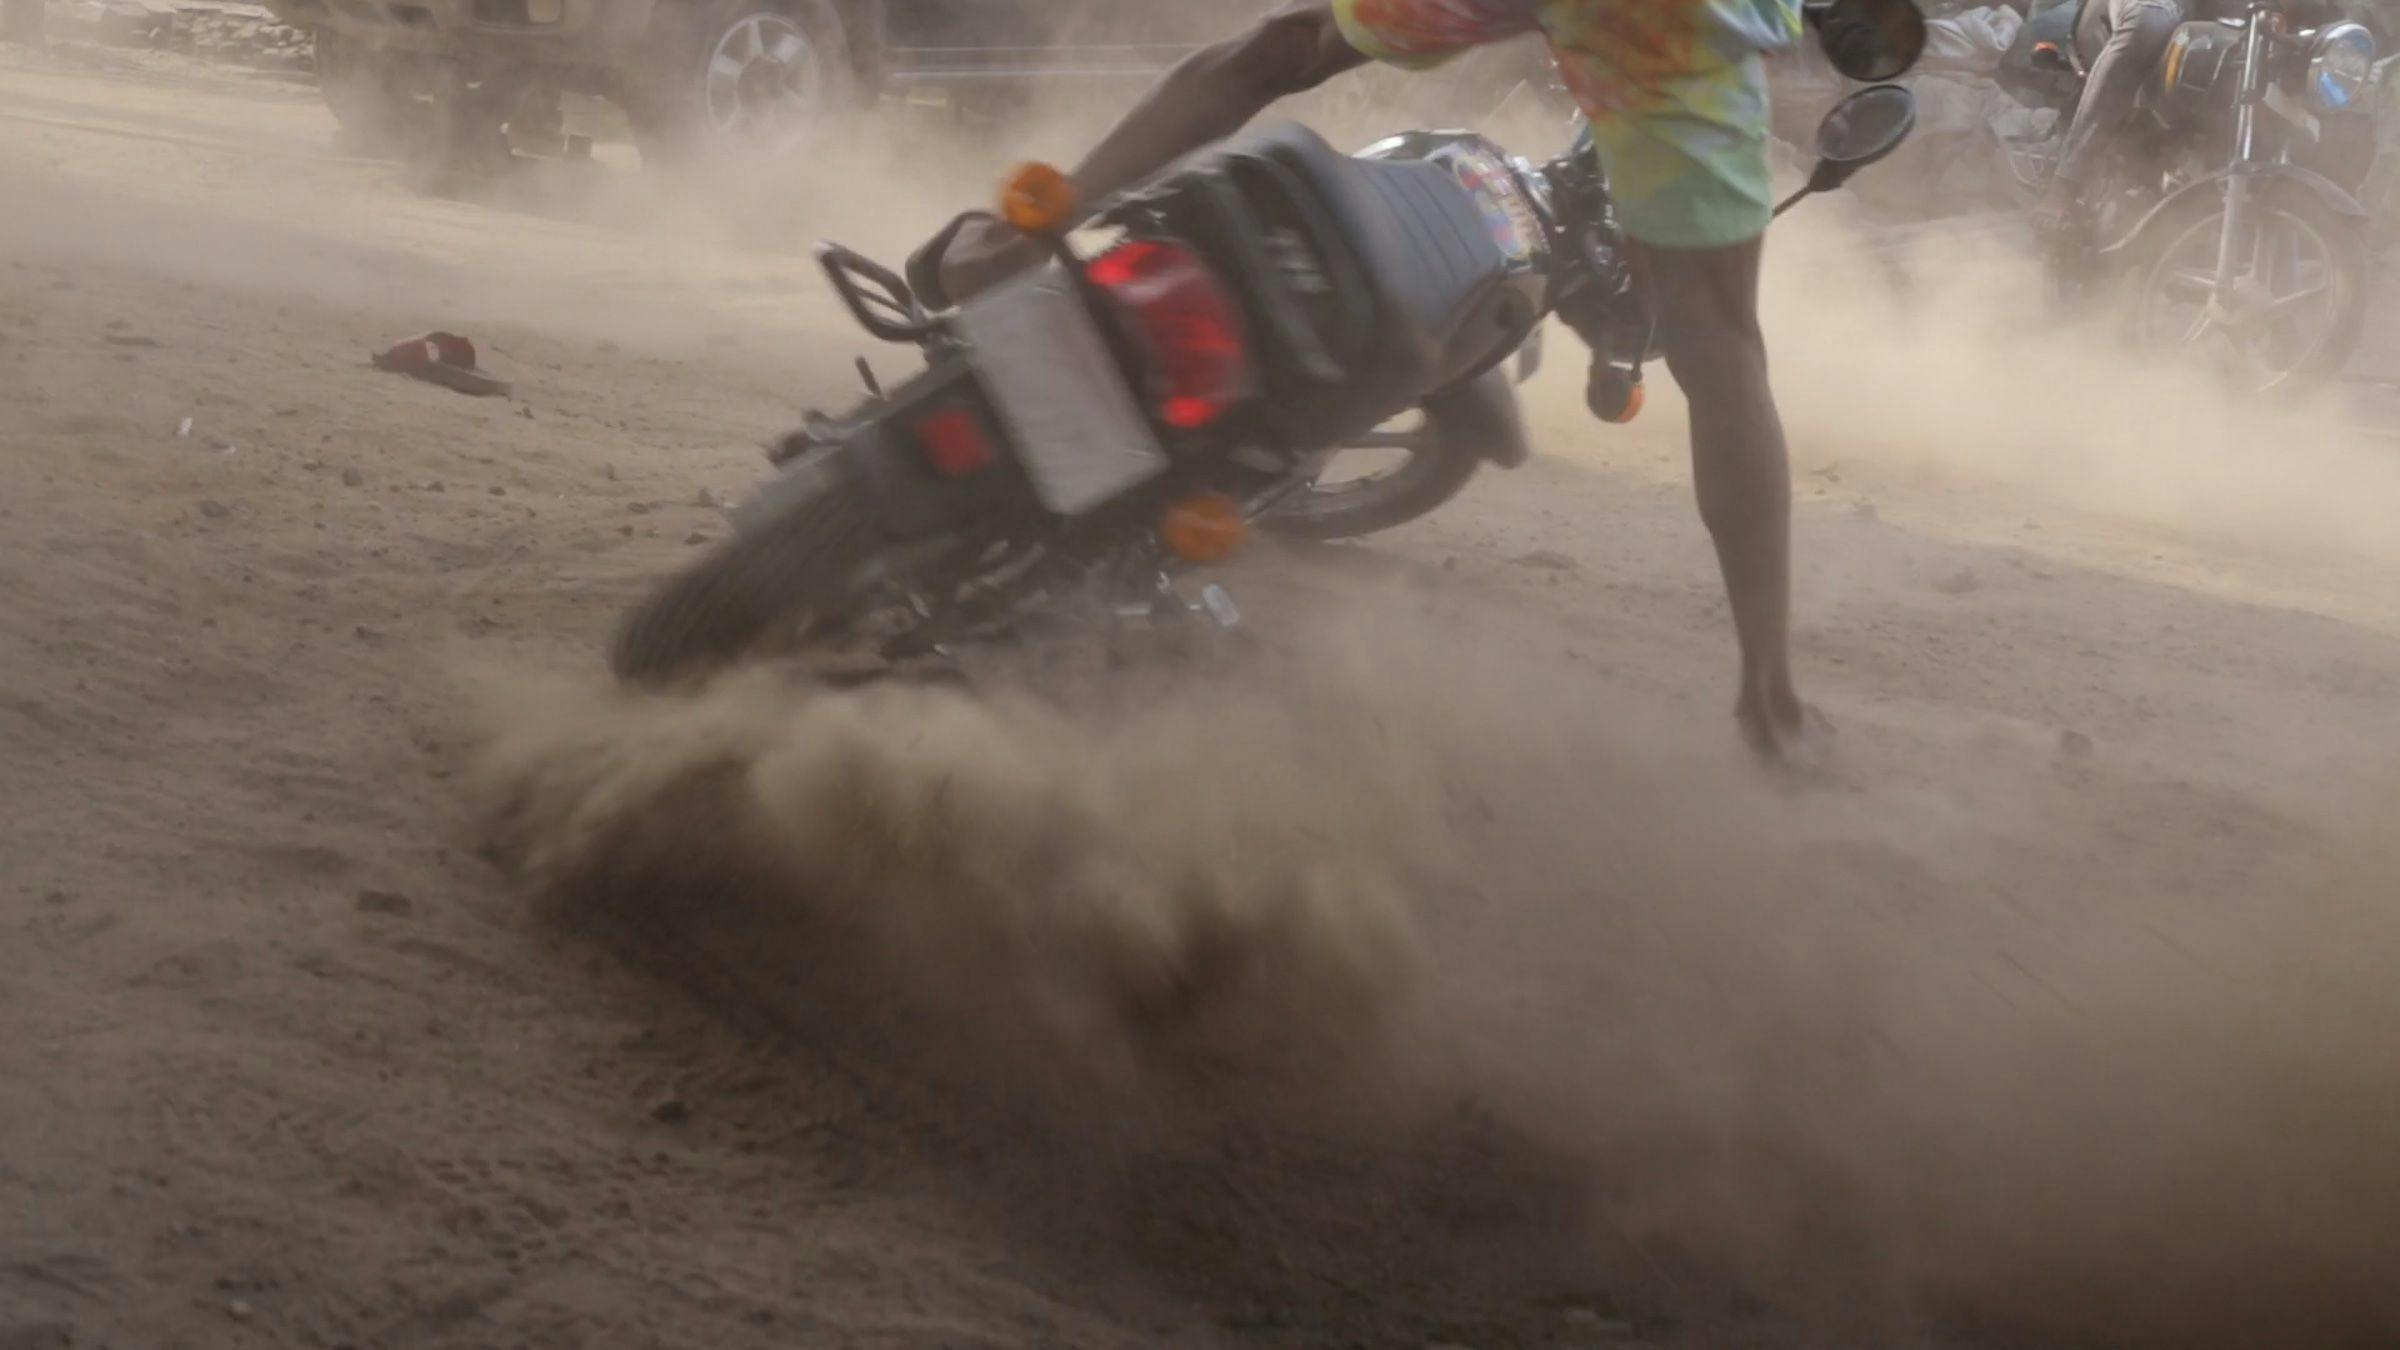 a person skidding on a motorbike. The image is blurry from the dust in the air